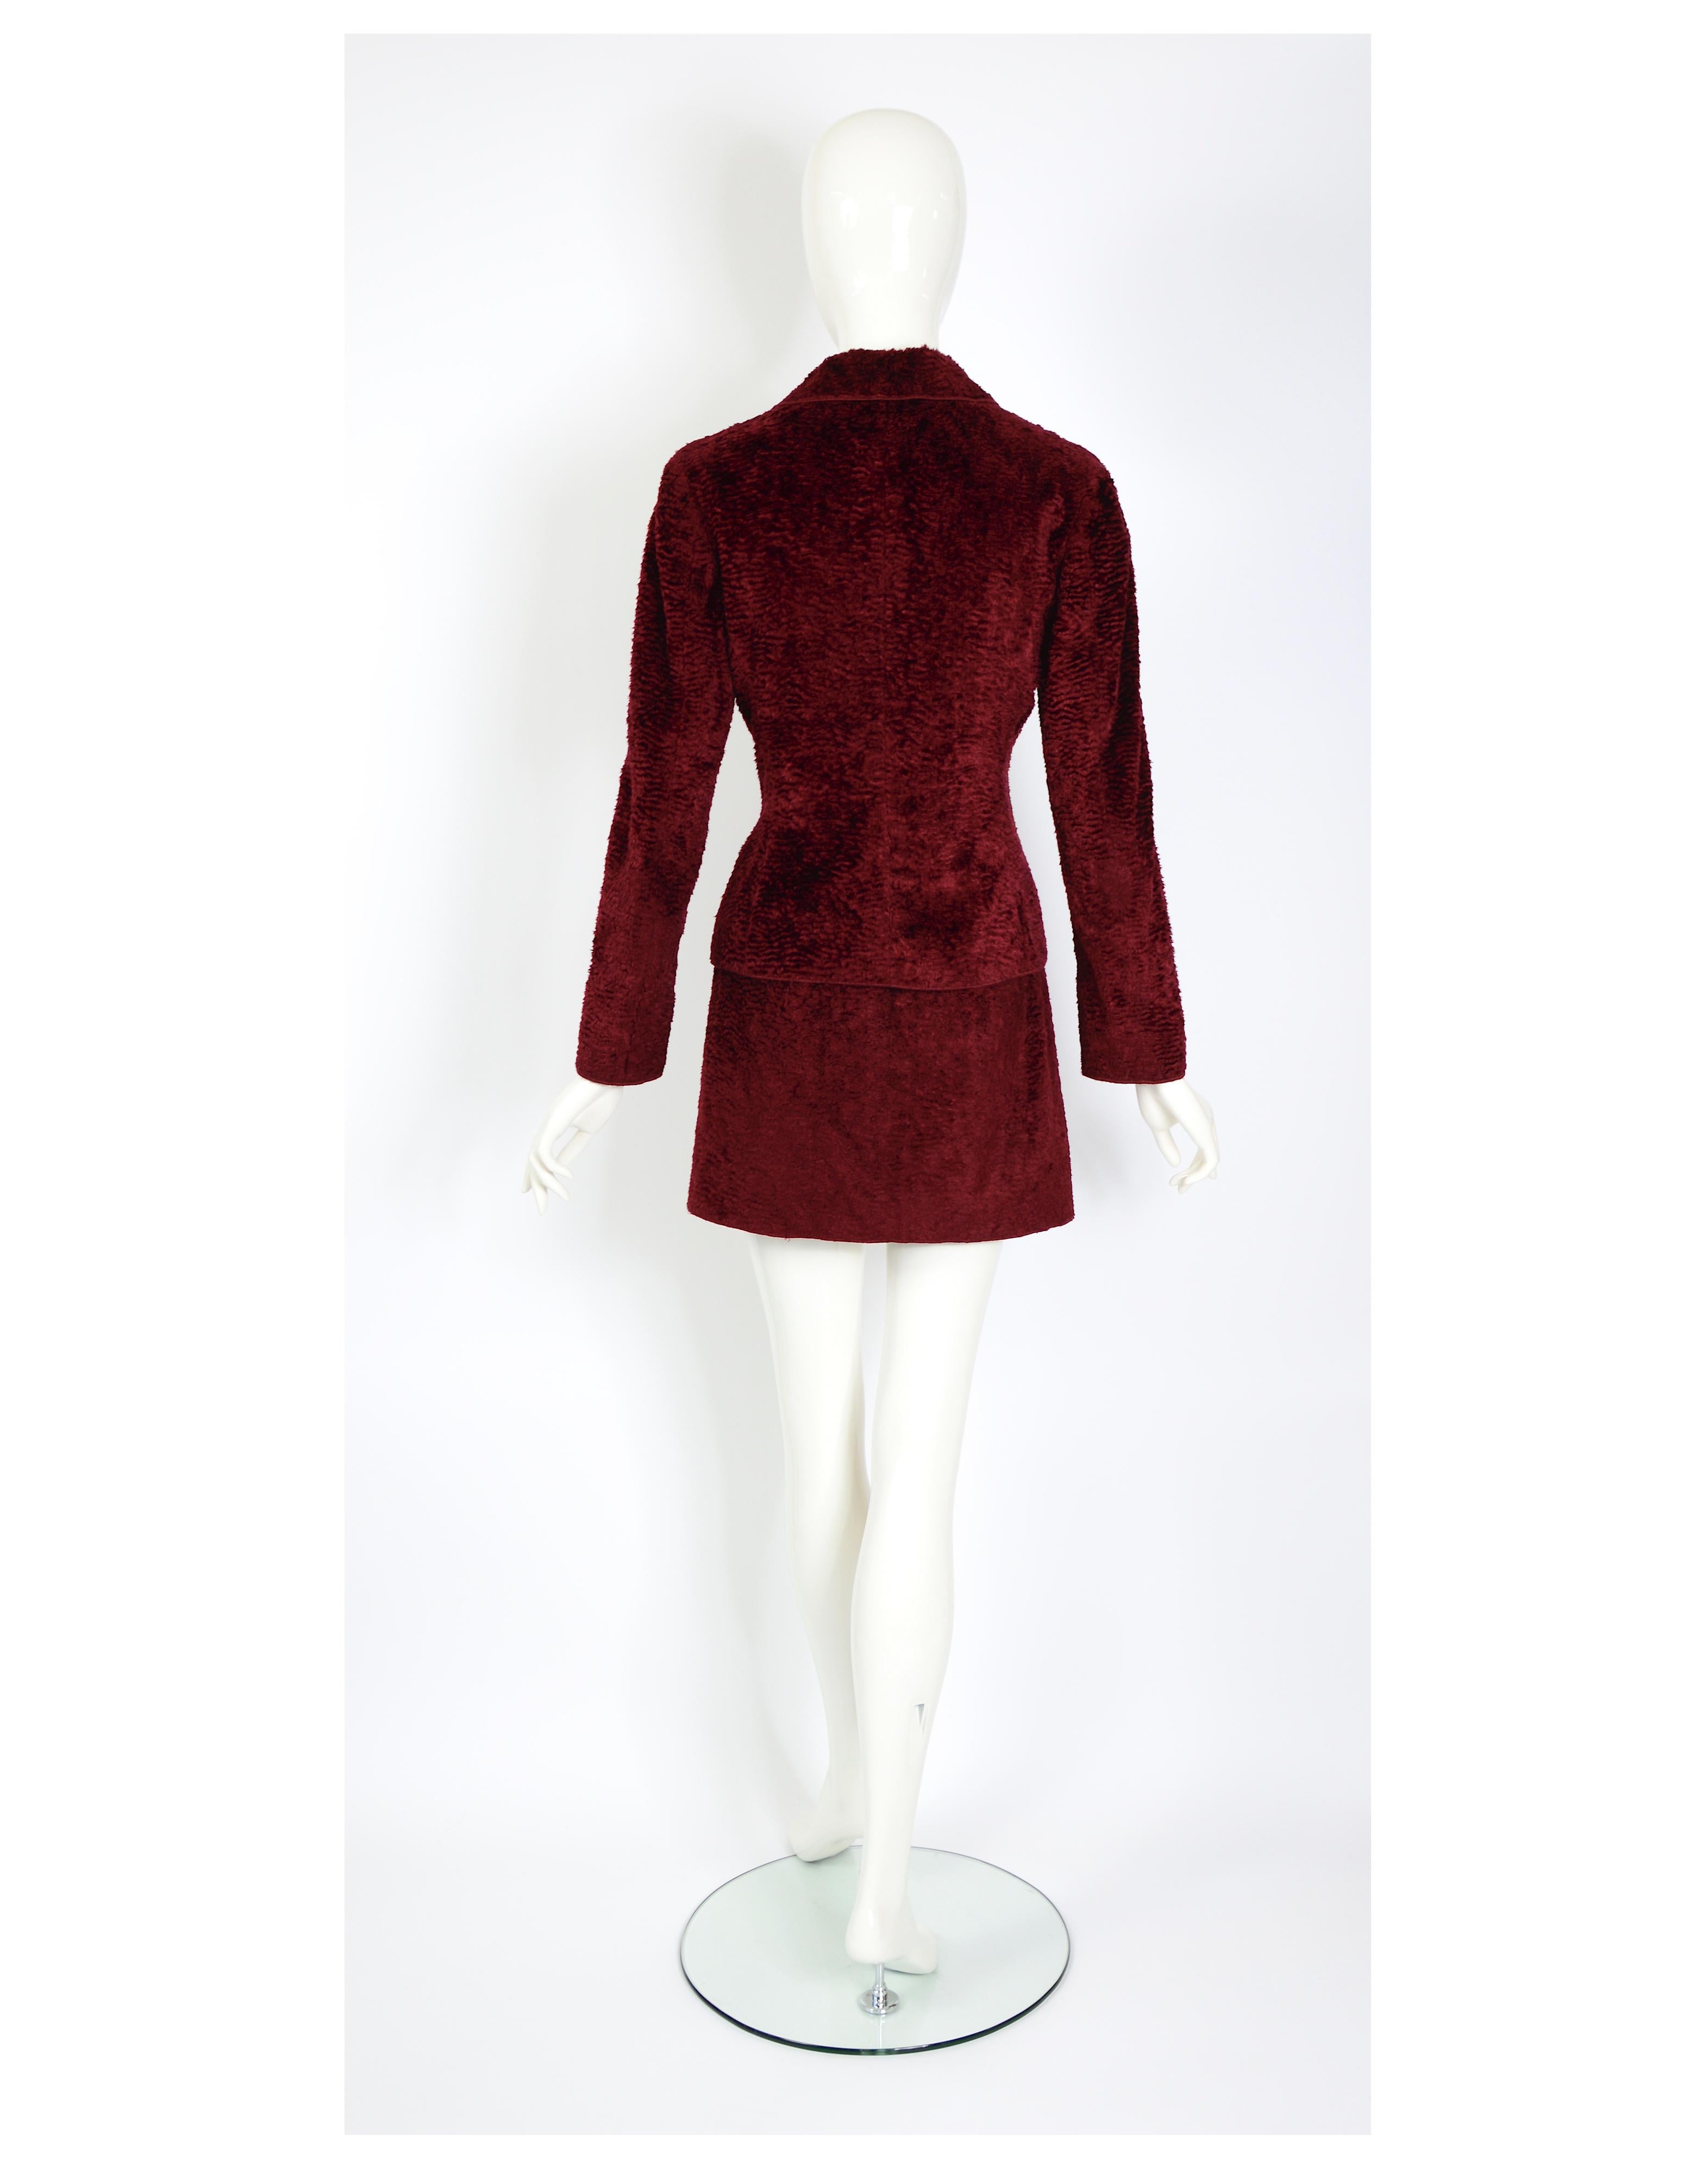 Ozbek by Rifat Ozbek vintage 90s burgundy cotton faux fur astrakhan suit In Excellent Condition For Sale In Antwerp, BE